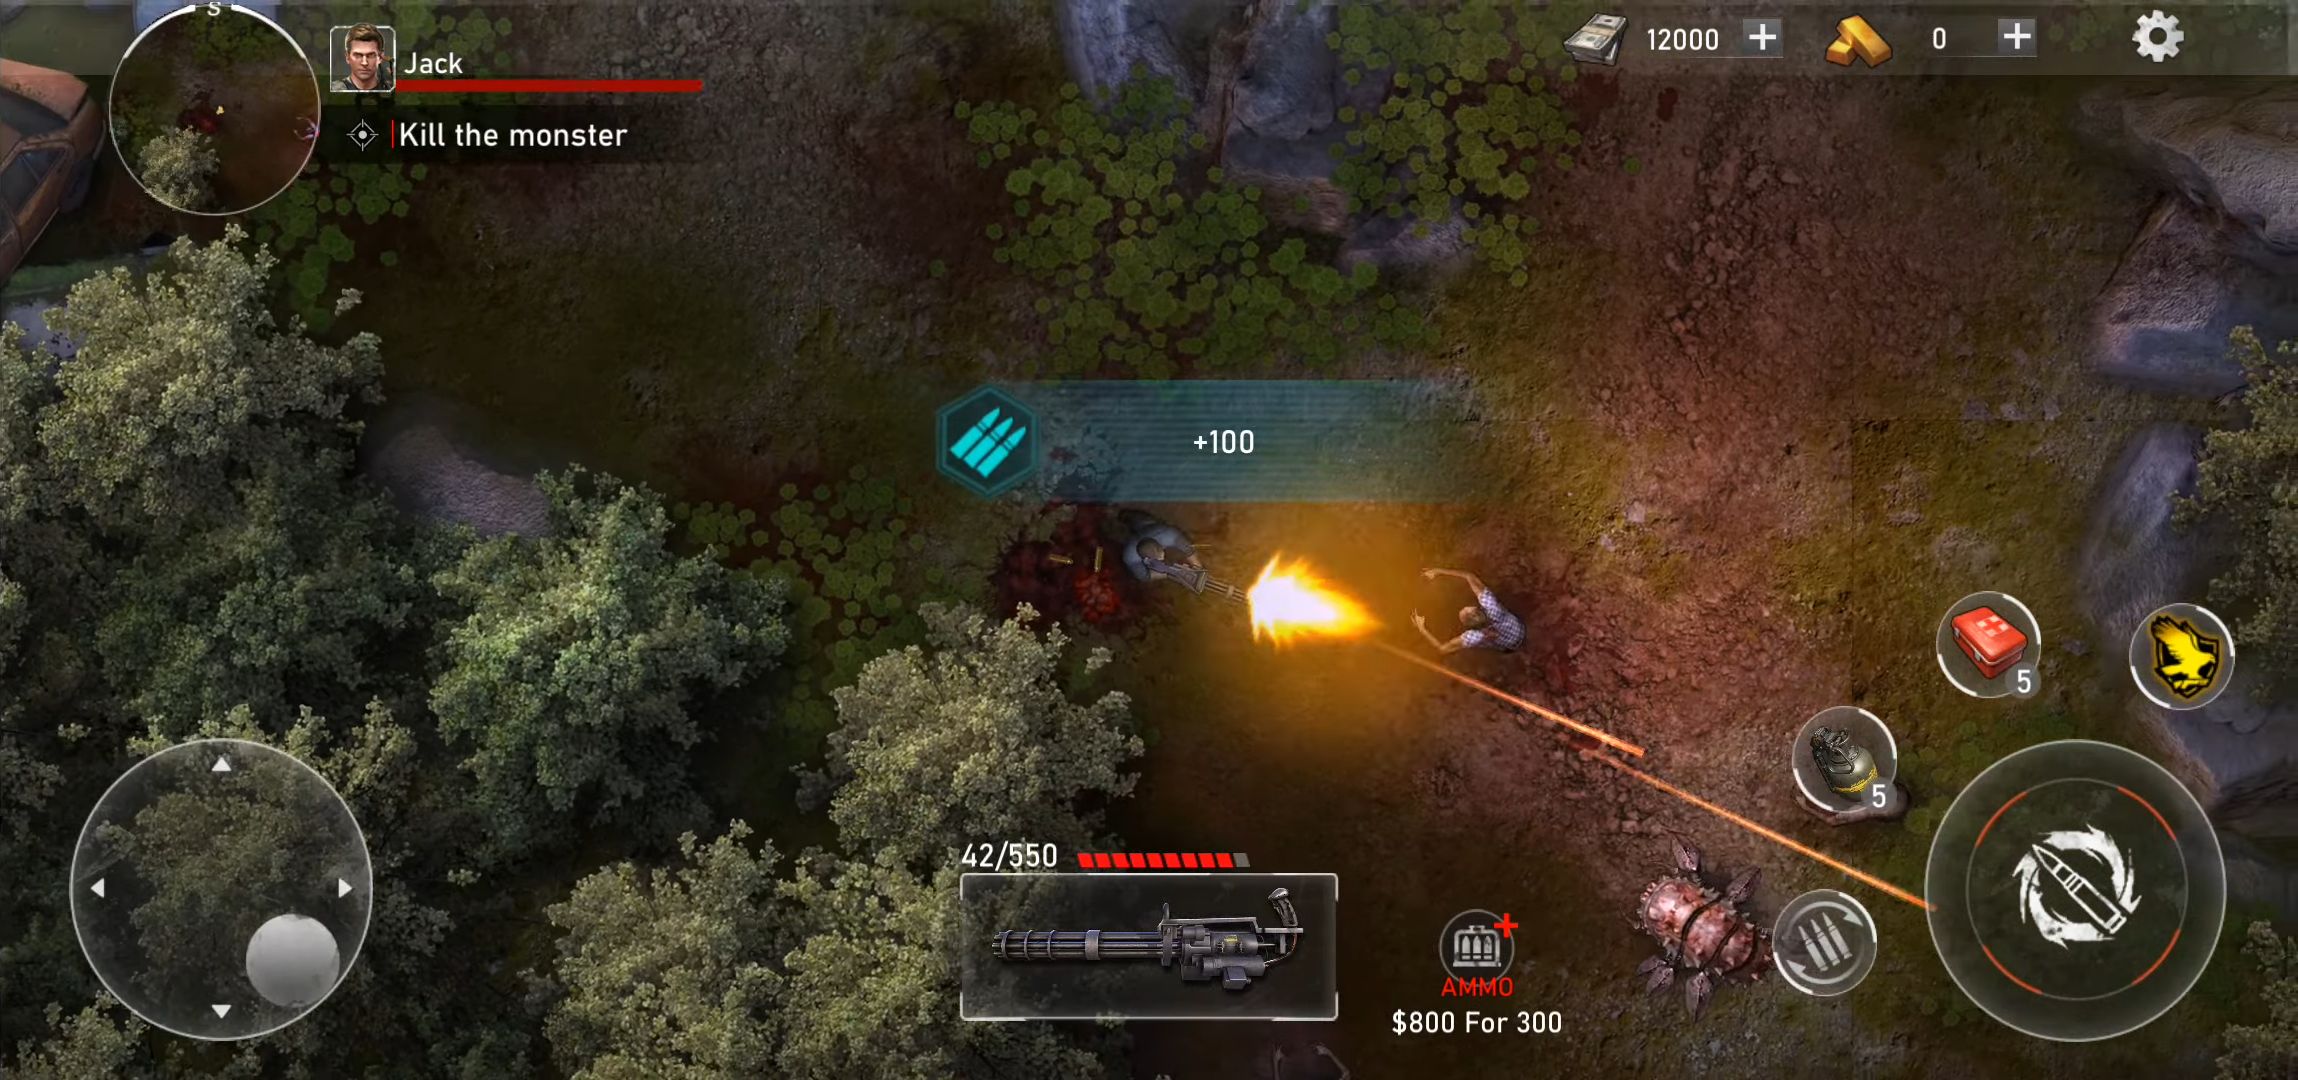 Gameplay of the Dead Zombie Shooter: Survival for Android phone or tablet.